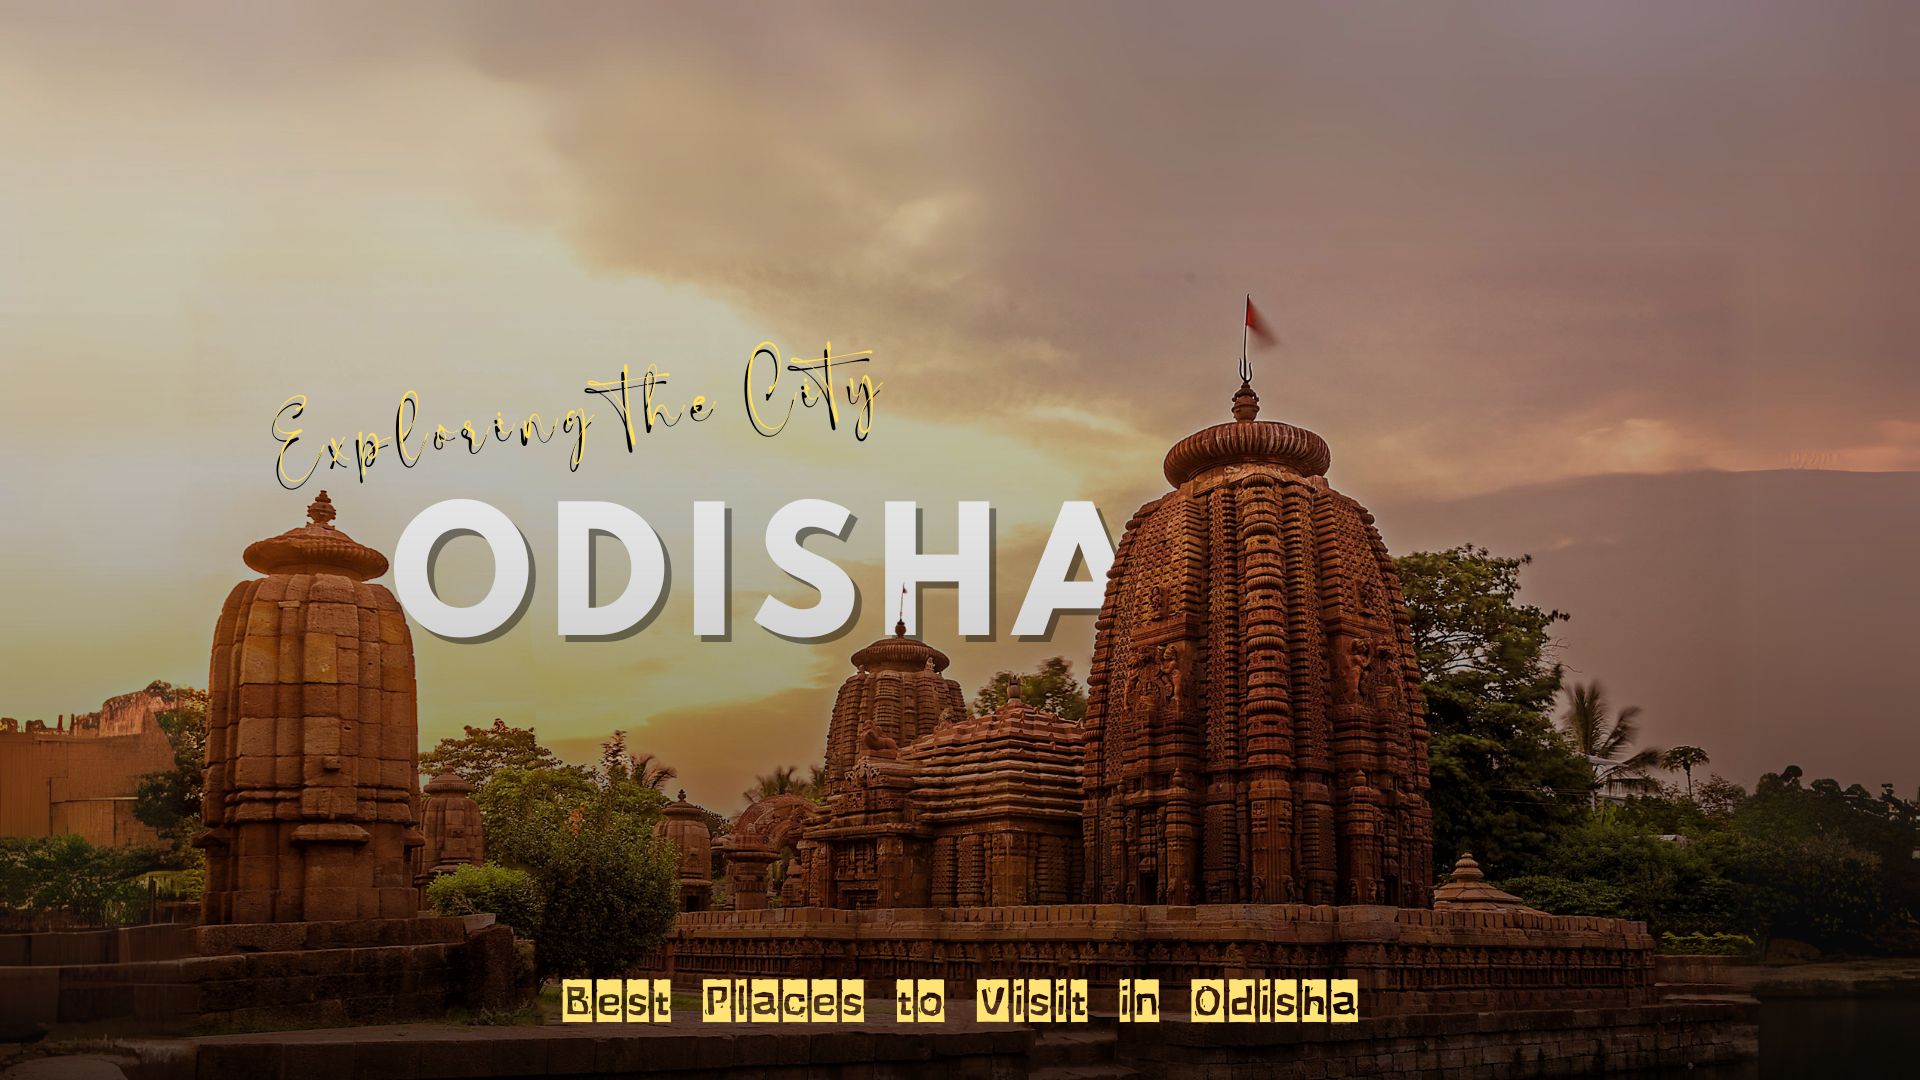 Top 10 places to visit in Odisha